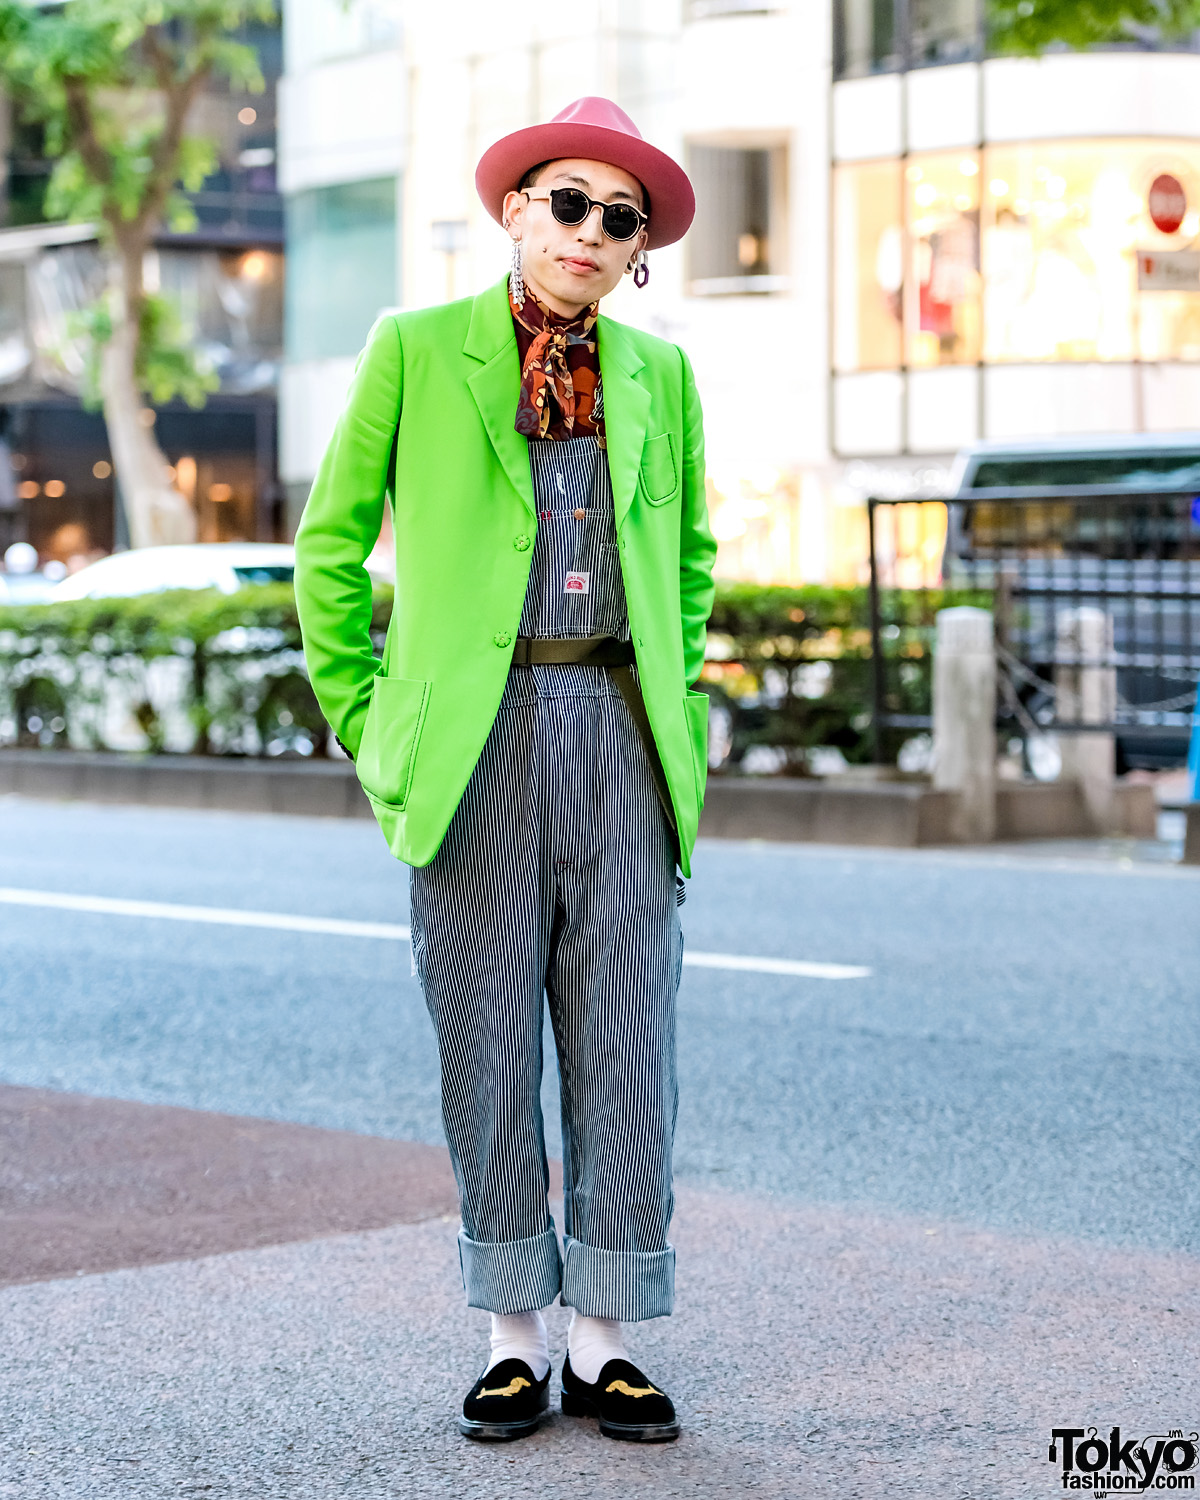 Japanese Streetwear w/ Maison Margiela Neon Blazer, Gucci Top, Striped Overalls & Thom Browne Loafers